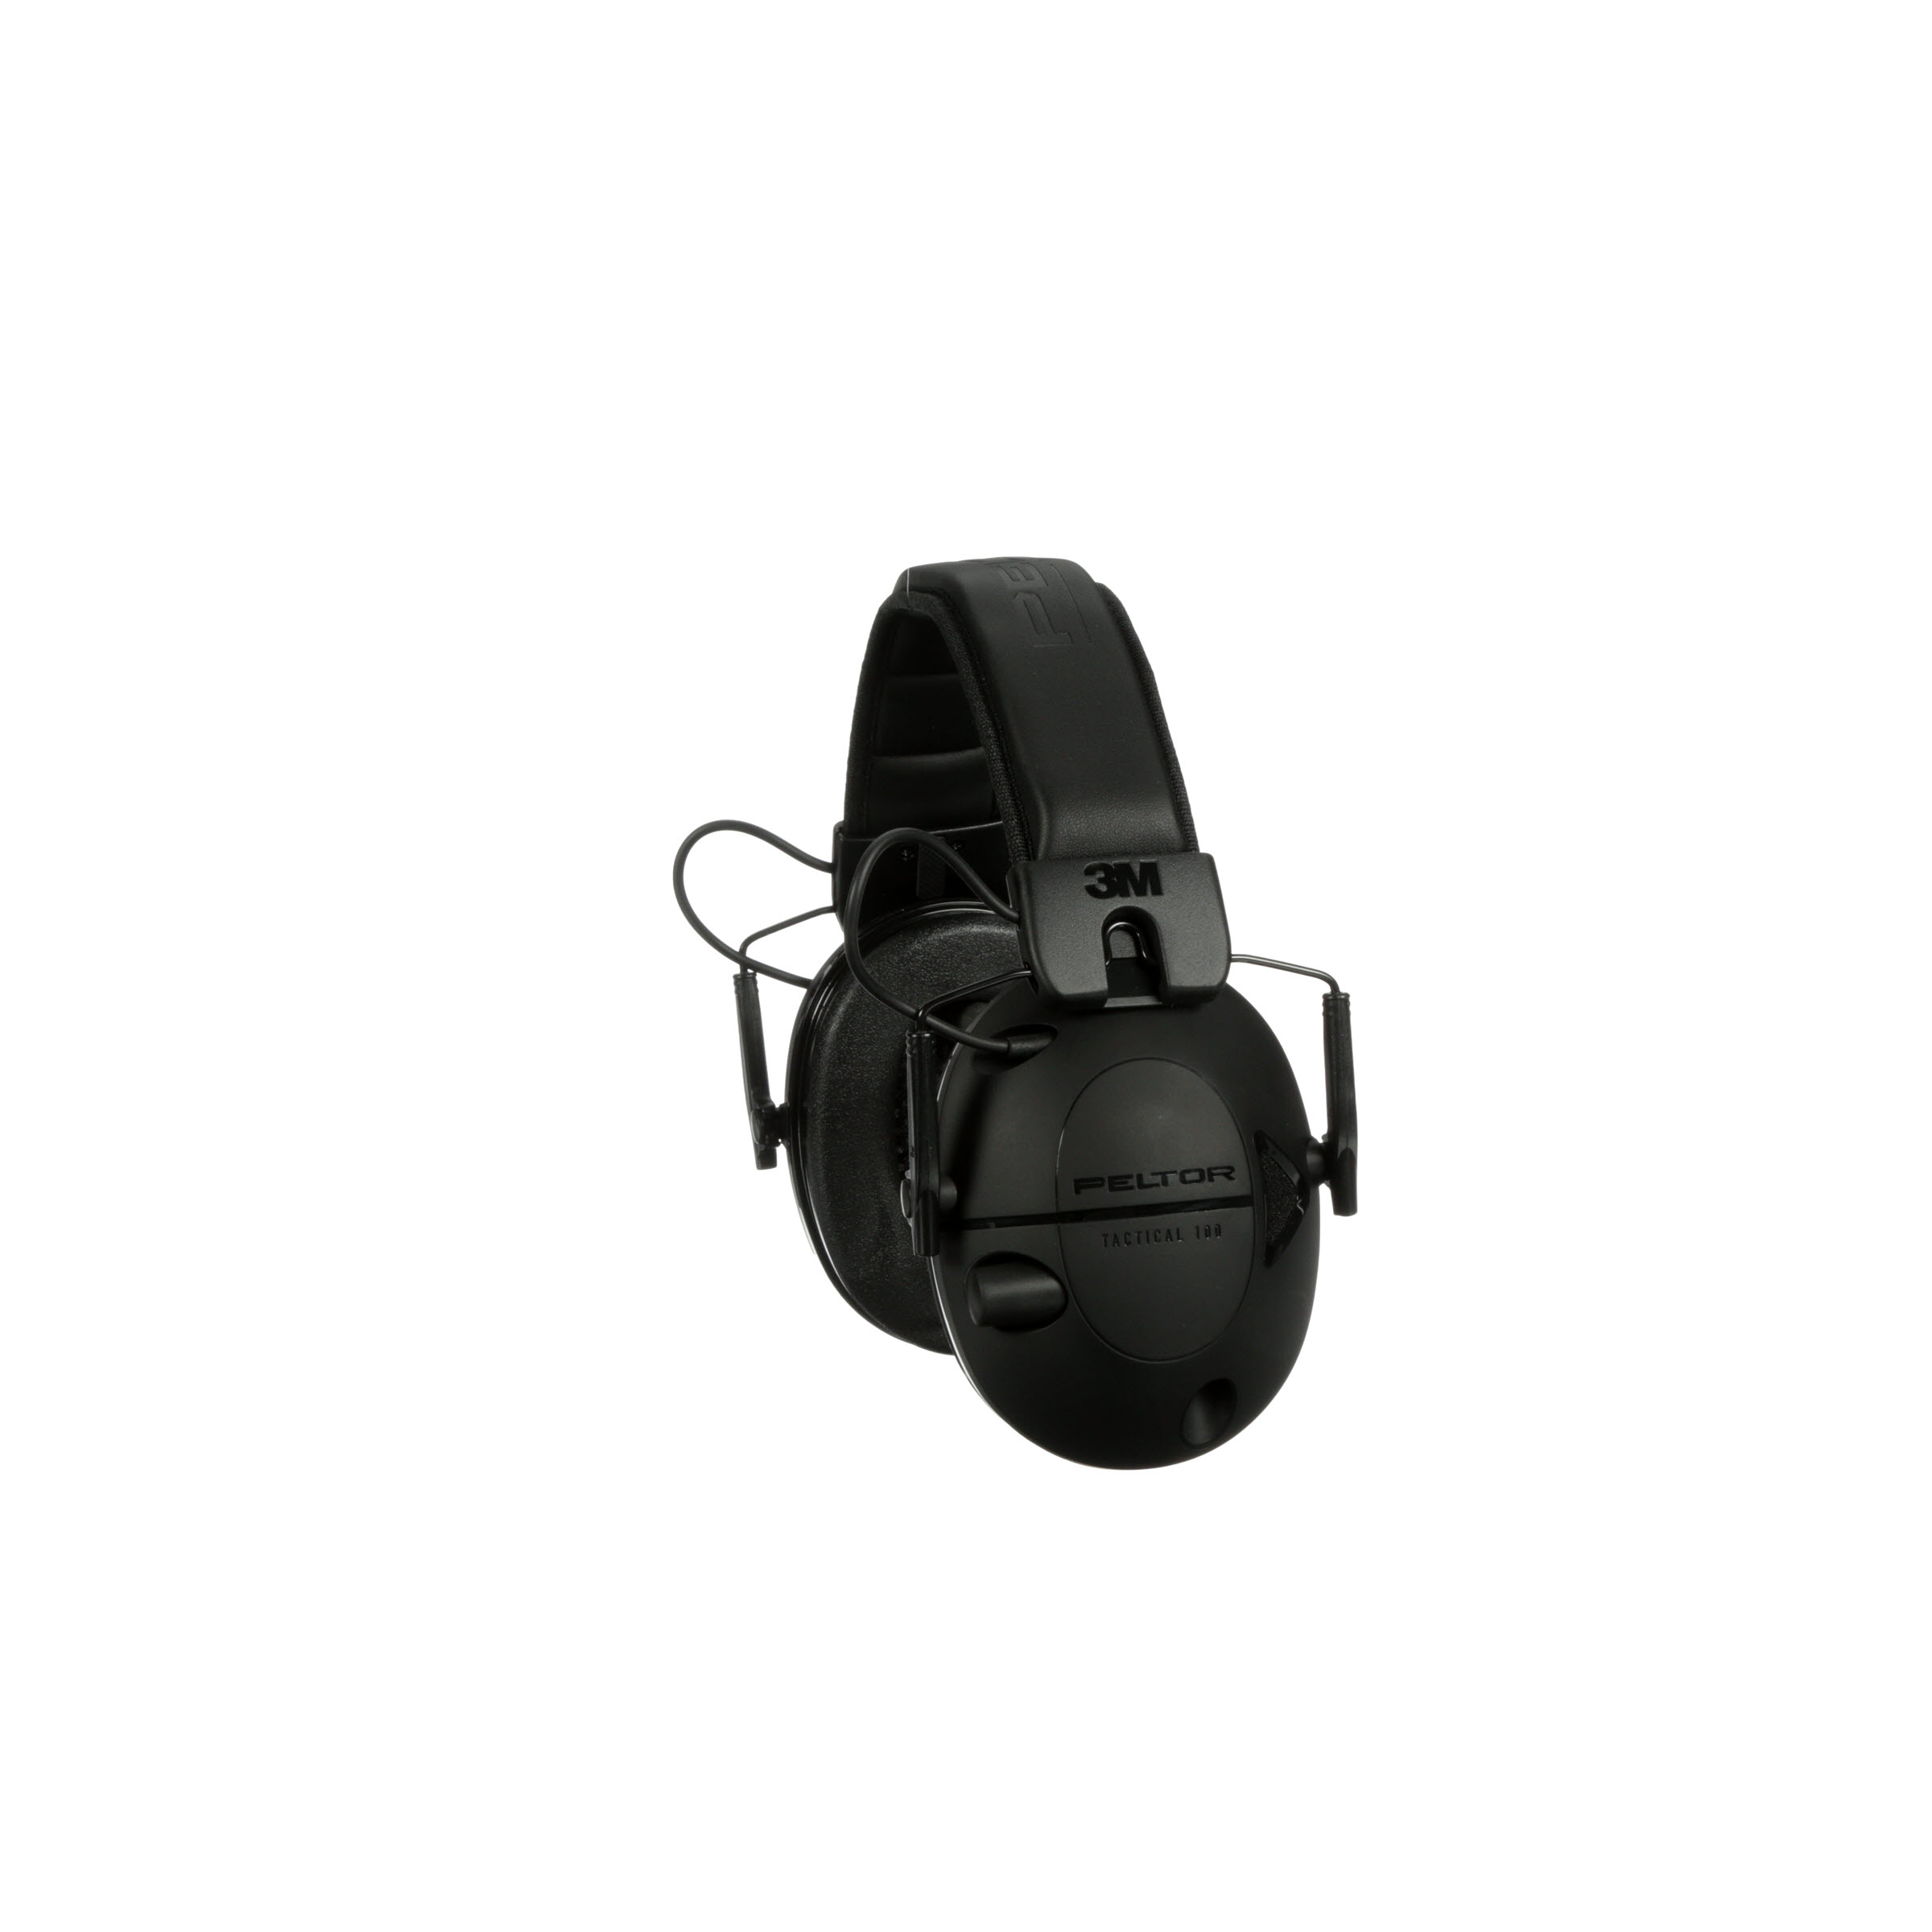 Peltor Sport Tactical 100 Electronic Hearing Protector (TAC100) by 3M - 1